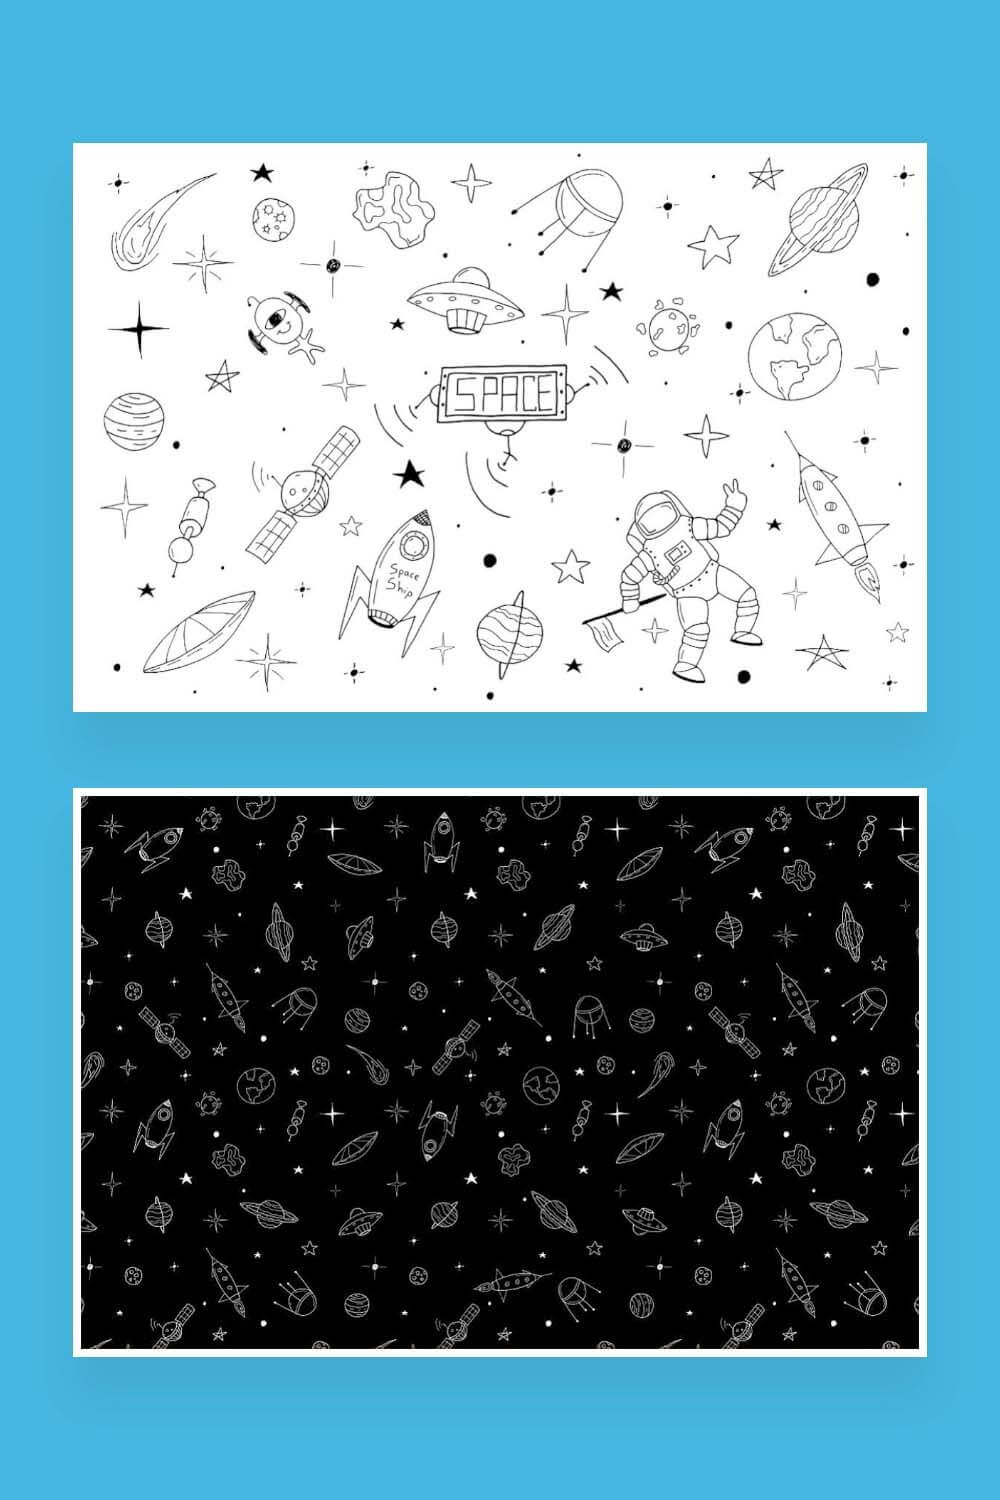 Space theme drawing in doodle style on a white and black background.